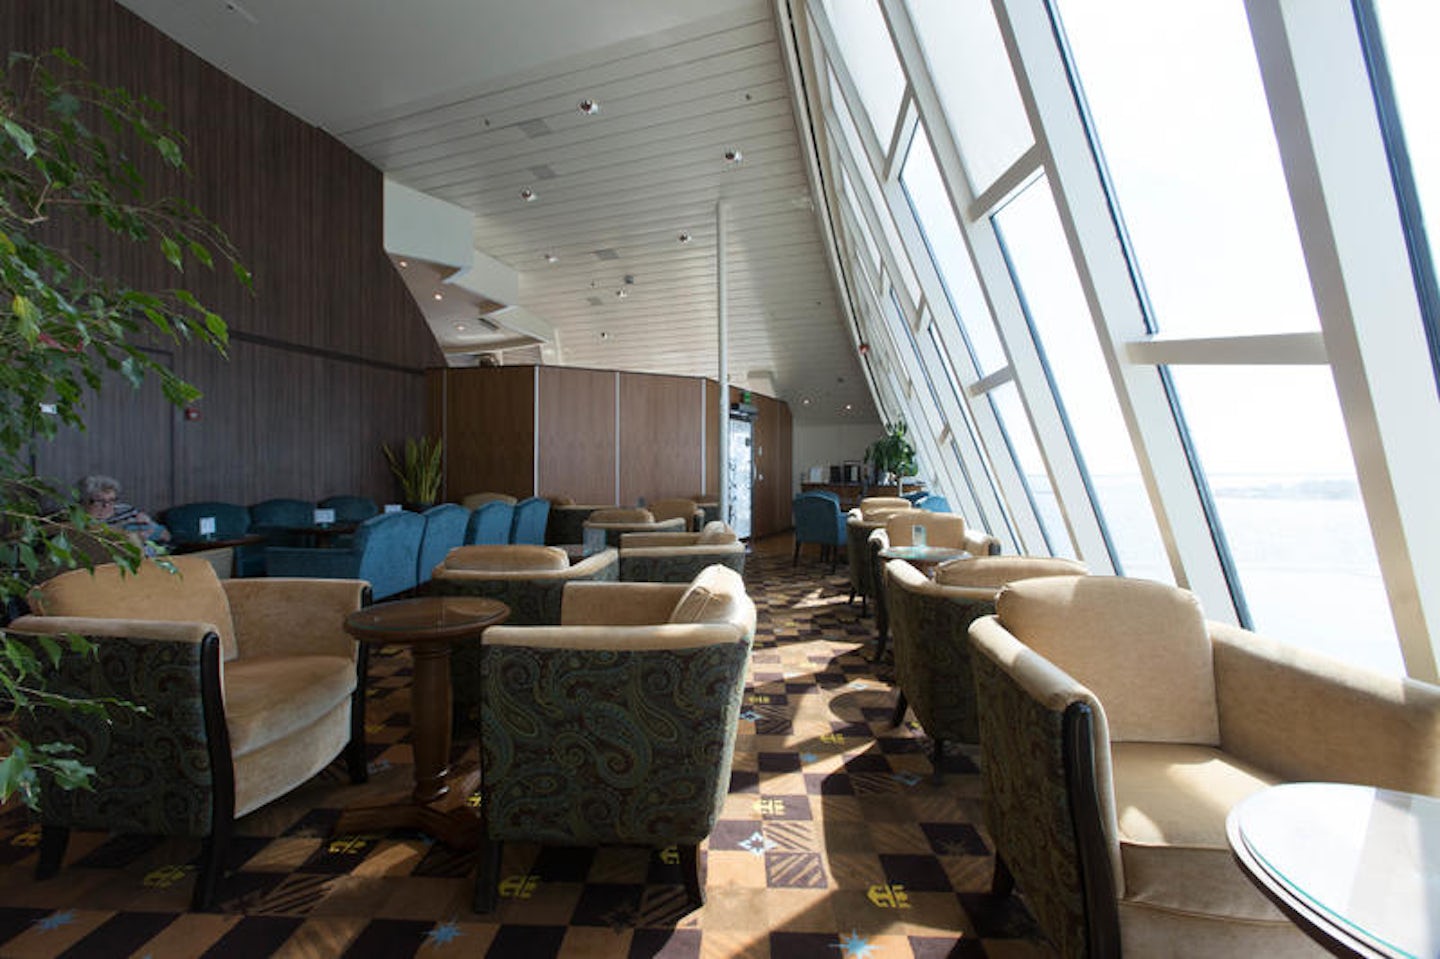 Concierge Lounge on Enchantment of the Seas